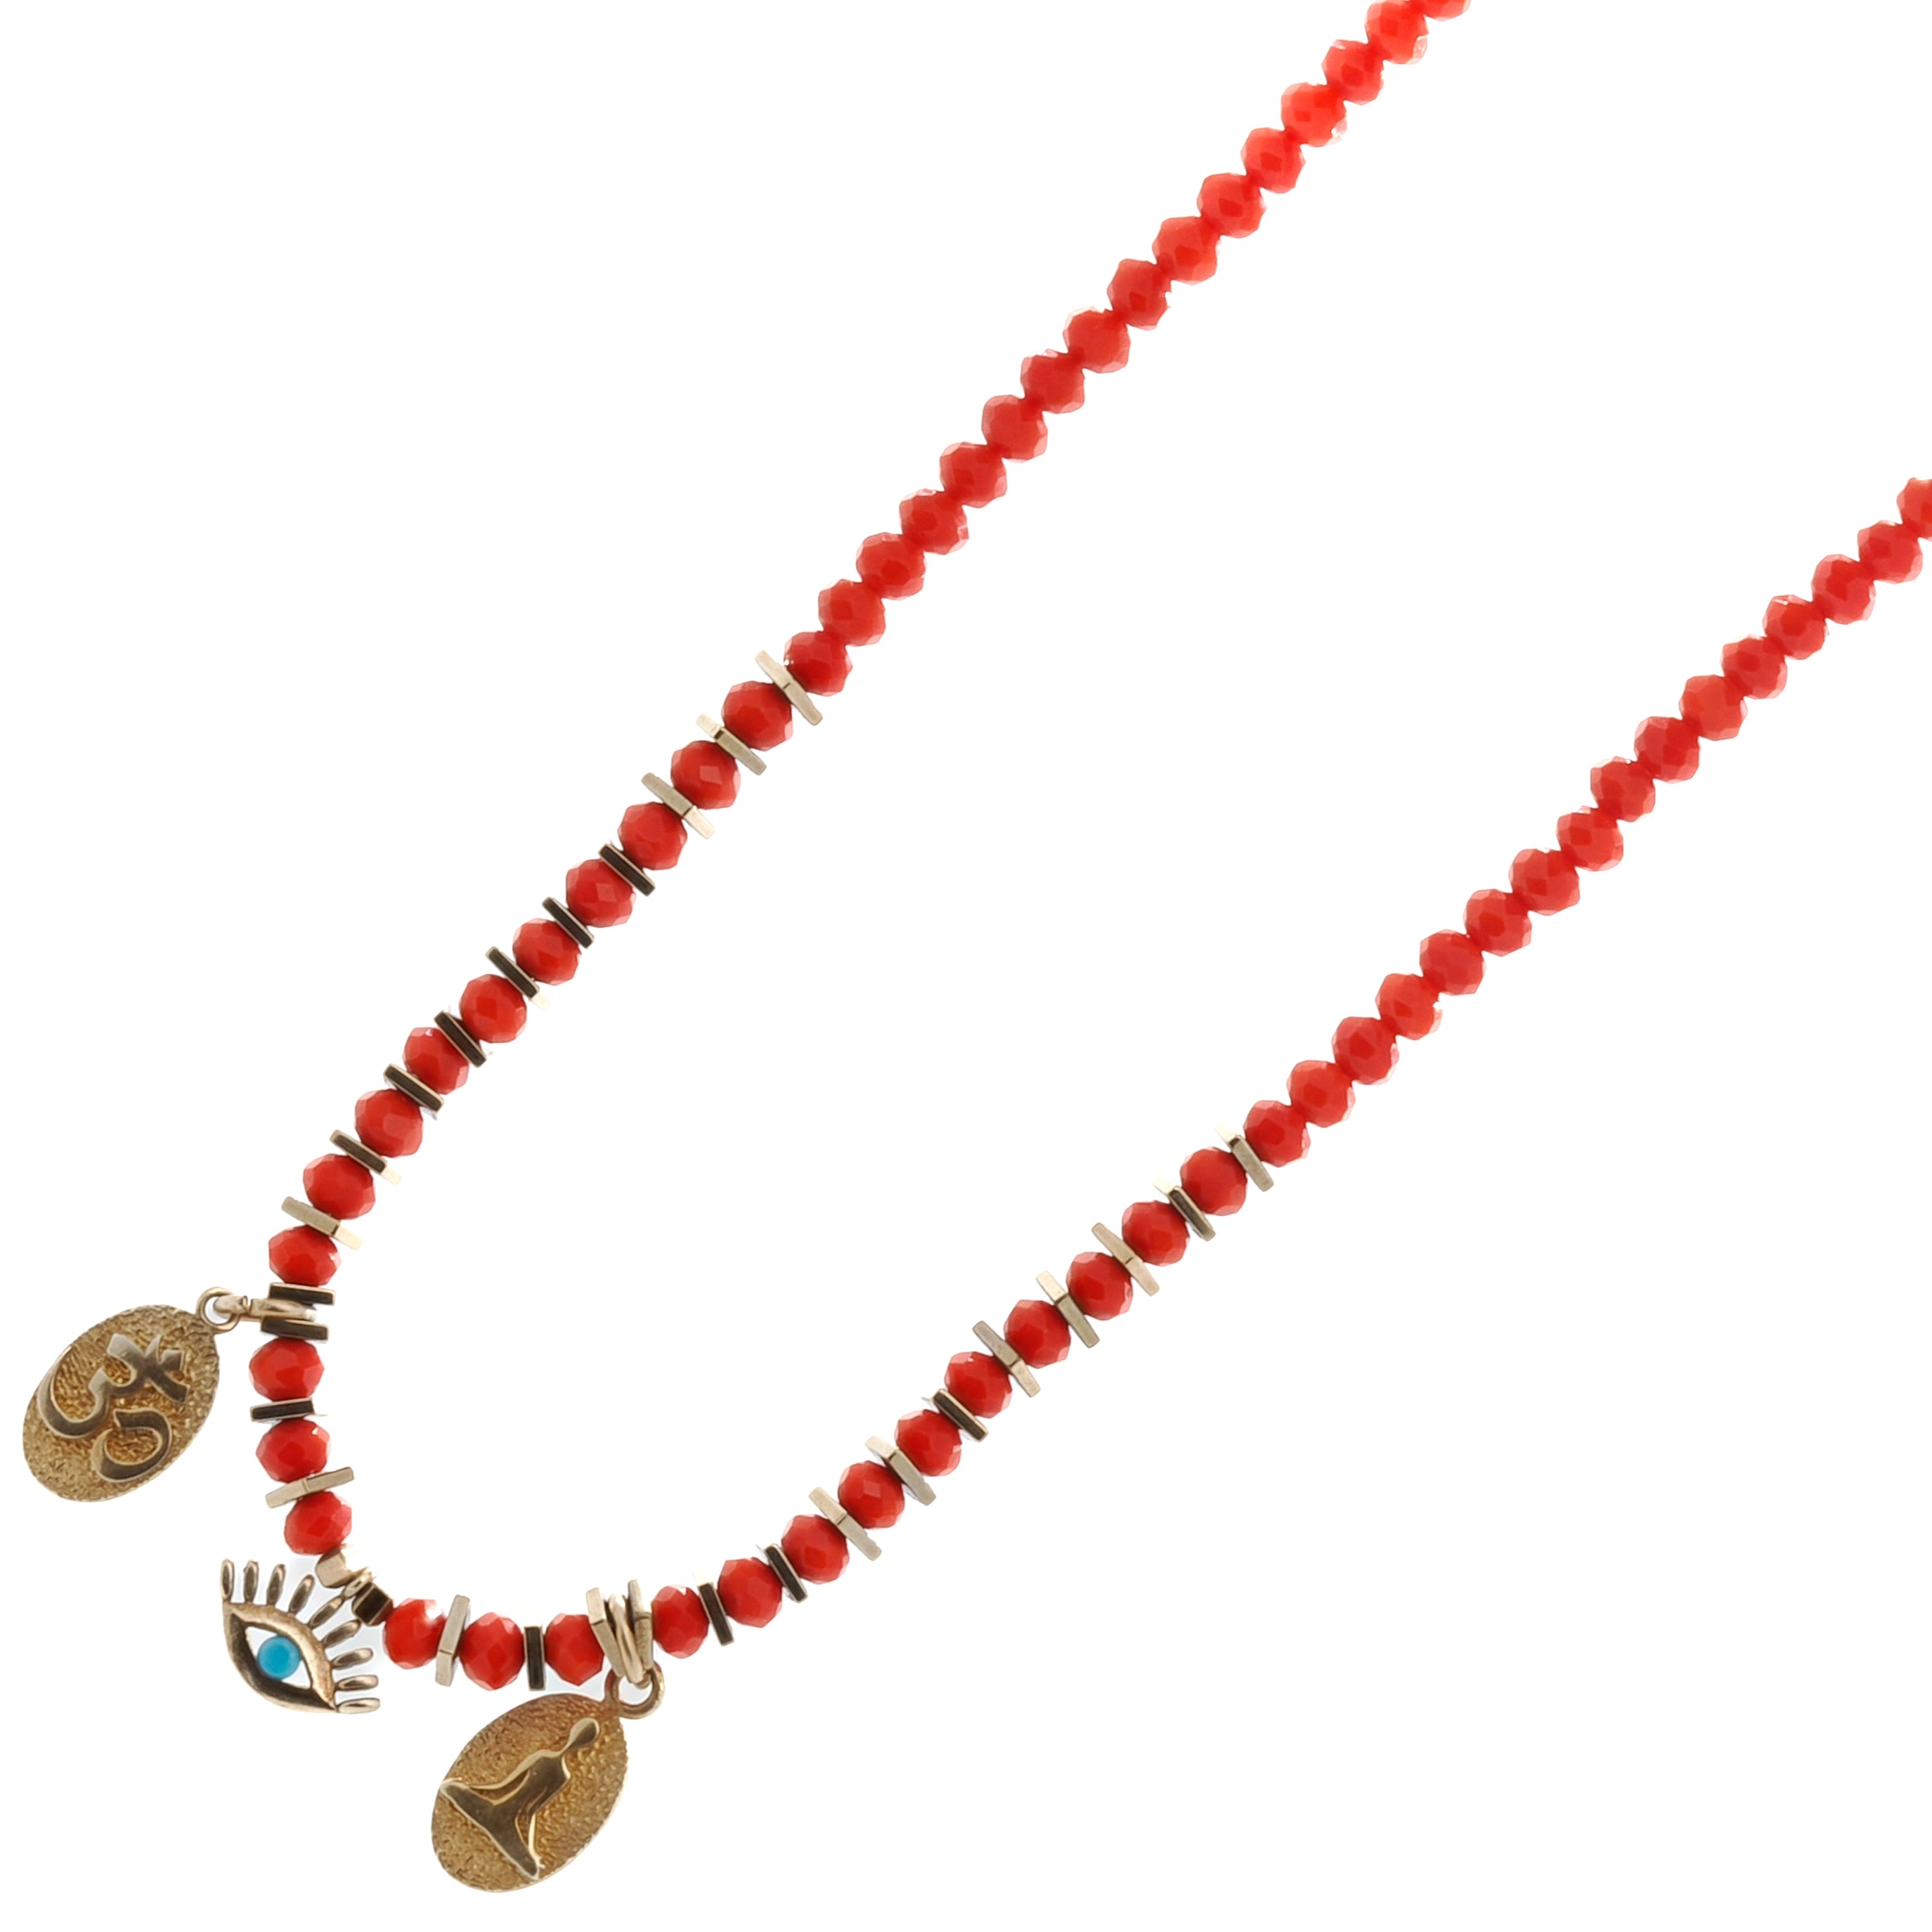 Beautifully crafted Yoga Girl Choker Necklace with gold charms and vibrant red crystal beads.